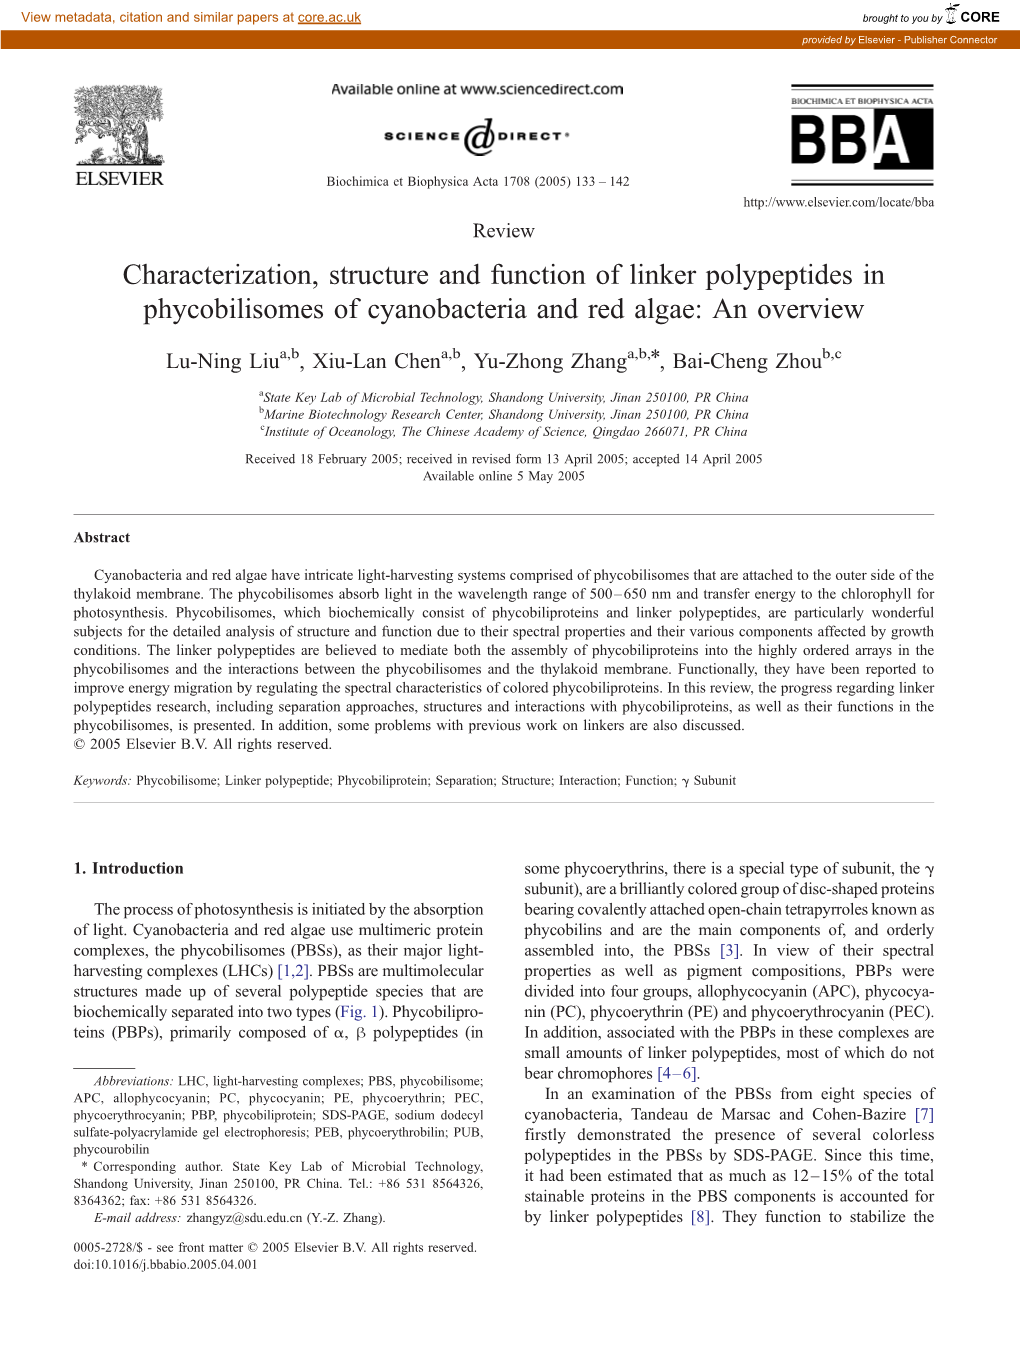 Characterization, Structure and Function of Linker Polypeptides in Phycobilisomes of Cyanobacteria and Red Algae: an Overview